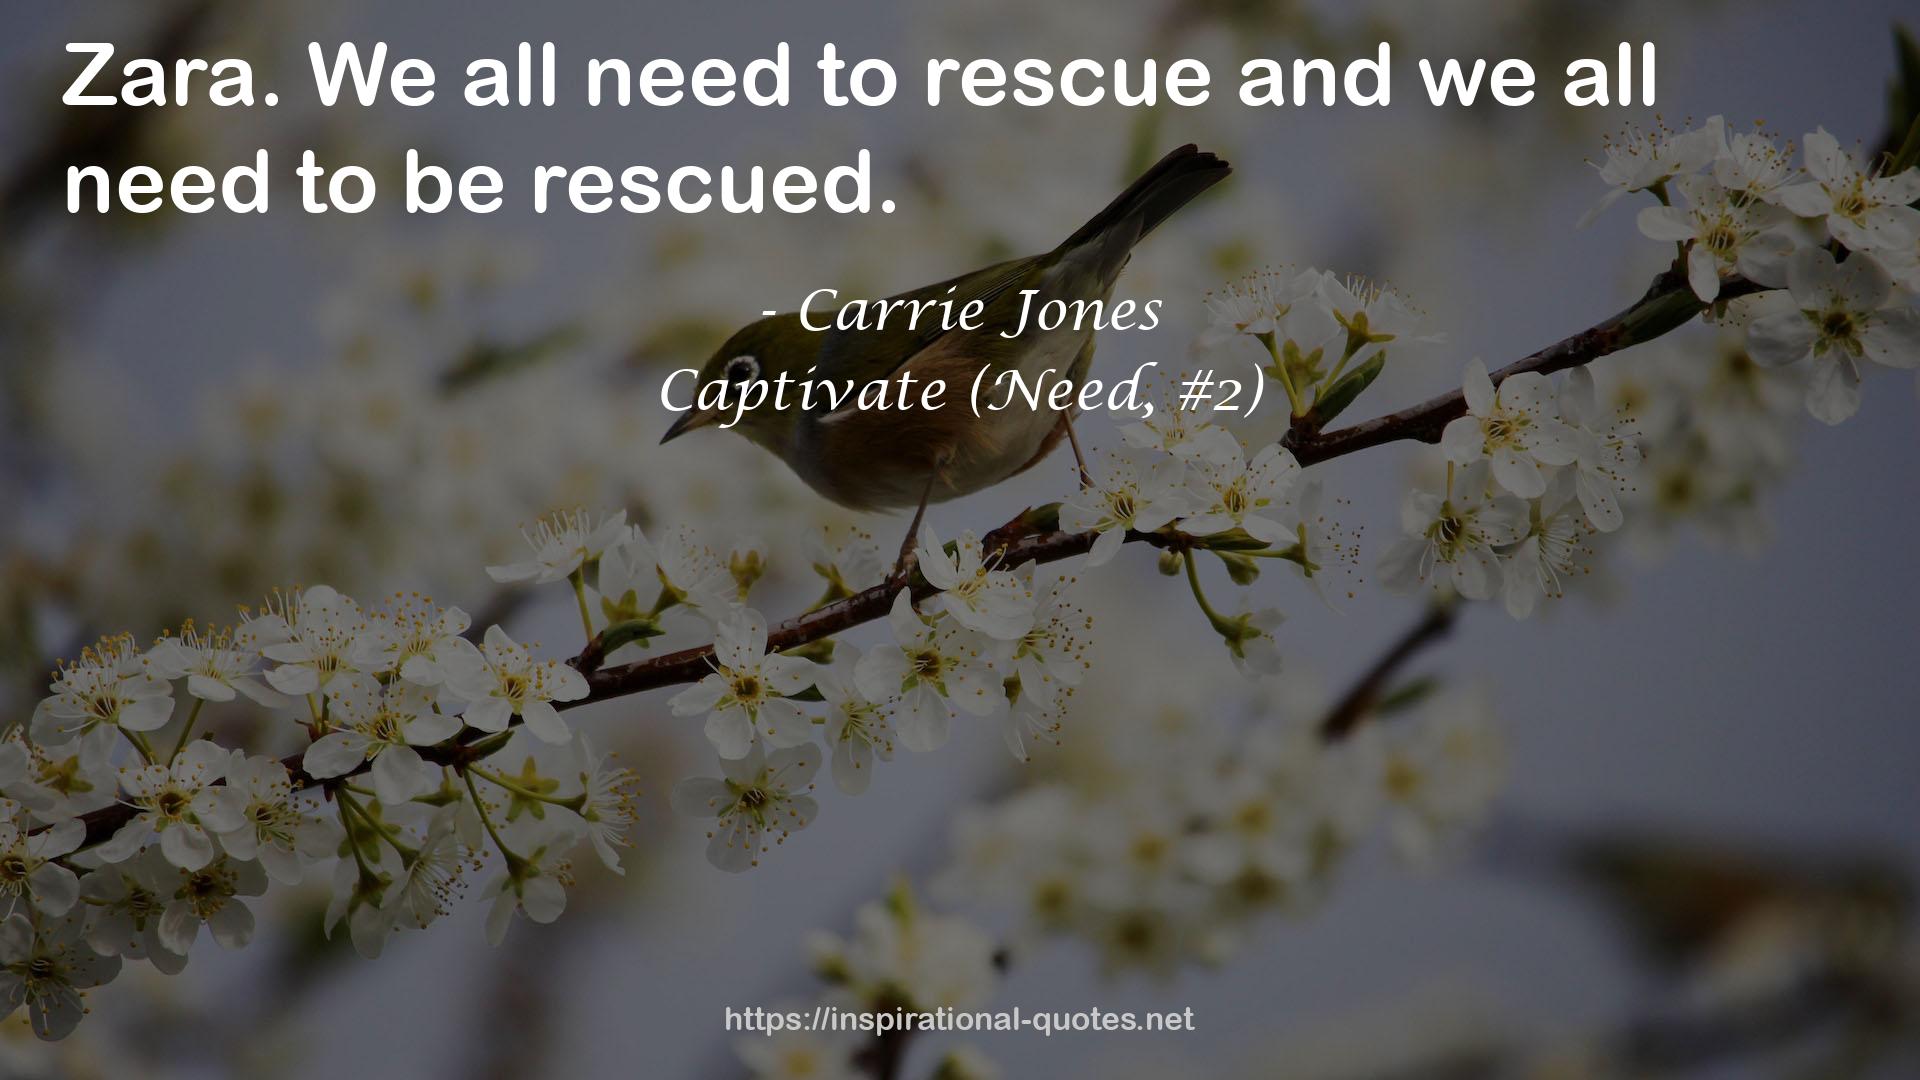 Captivate (Need, #2) QUOTES